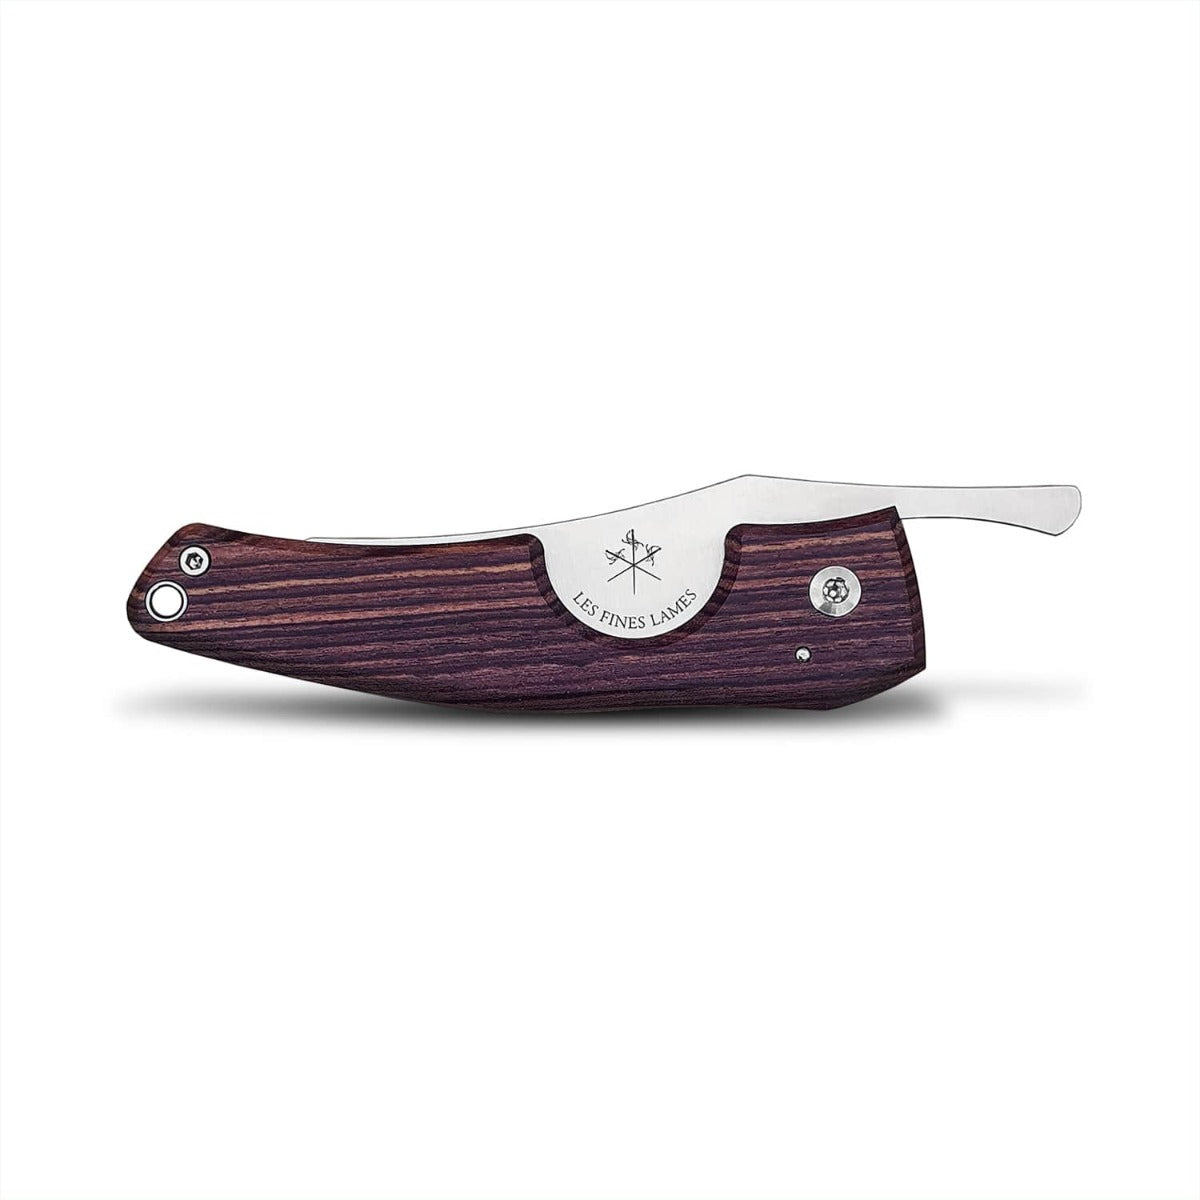 A Kirby Allison Kingwood Cigar Knife with a purple handle on a white background, featuring a lifetime warranty from KirbyAllison.com.